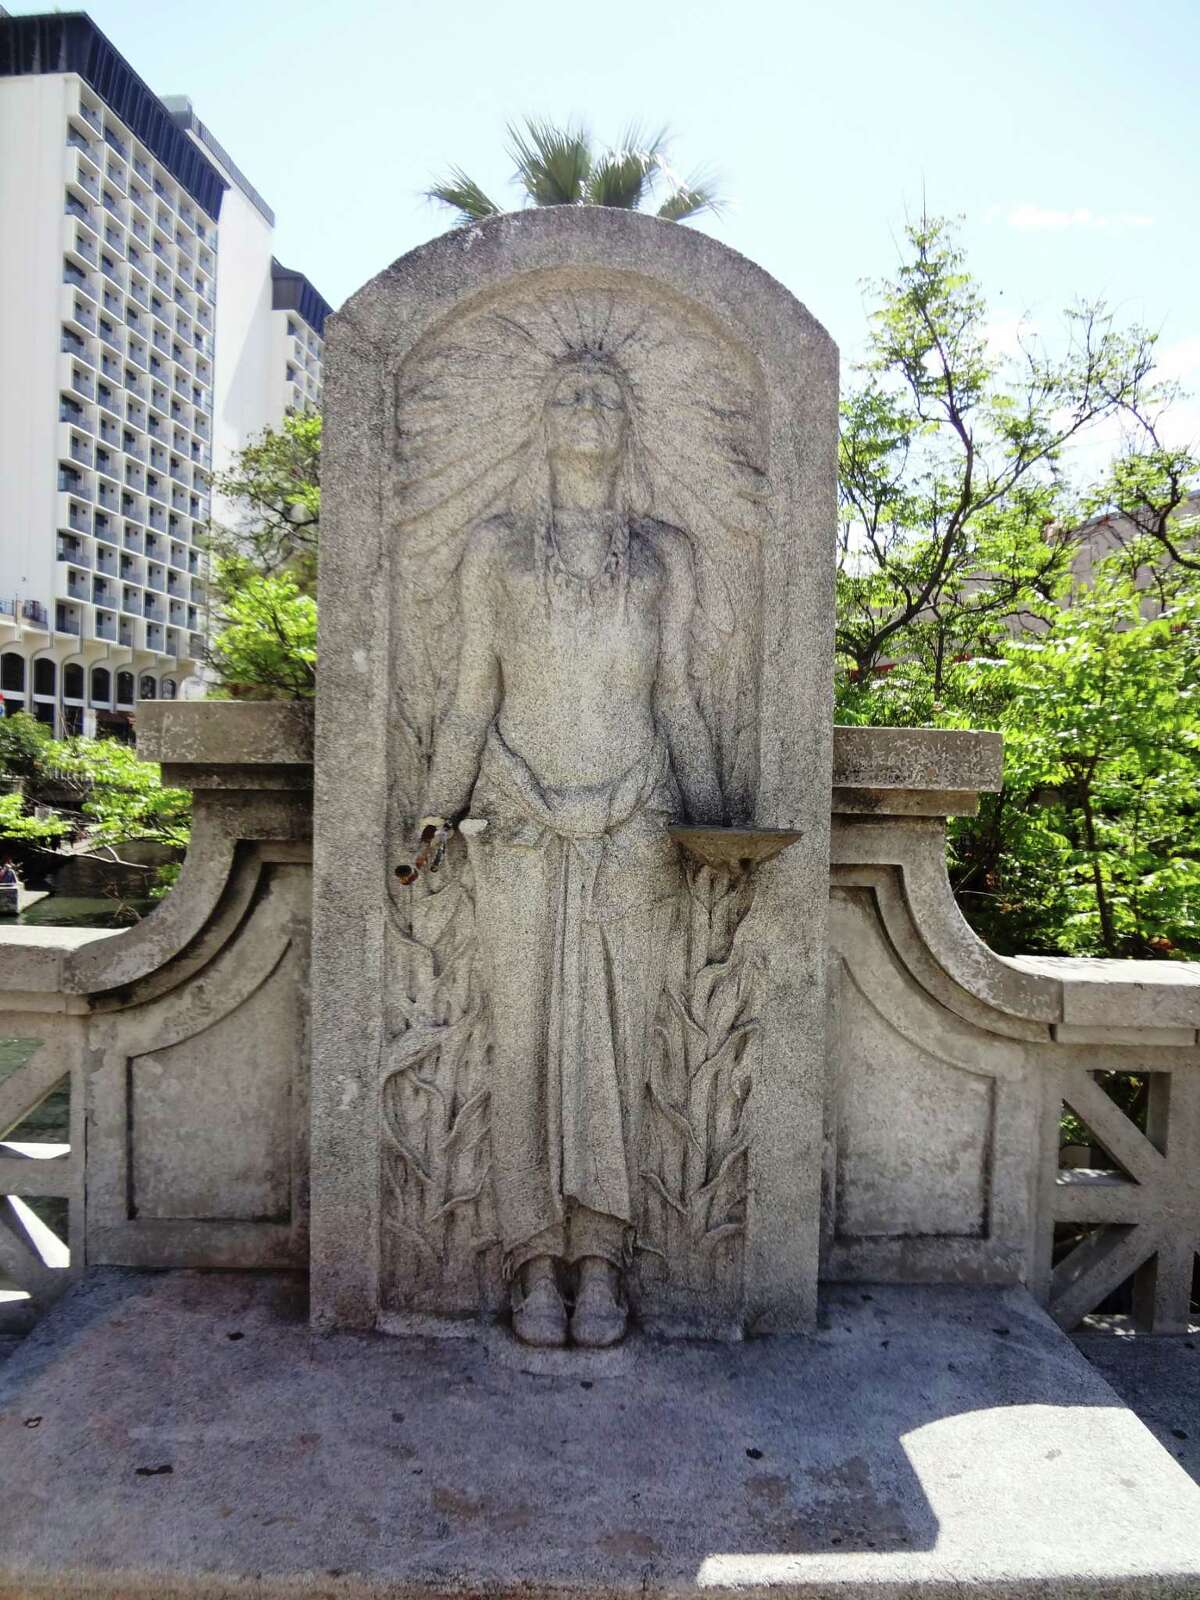 Hannibal Pianta worked with sculptor Waldine Tauch on her 1915 sculpture “The First Inhabitant” on the Commerce Street Bridge.